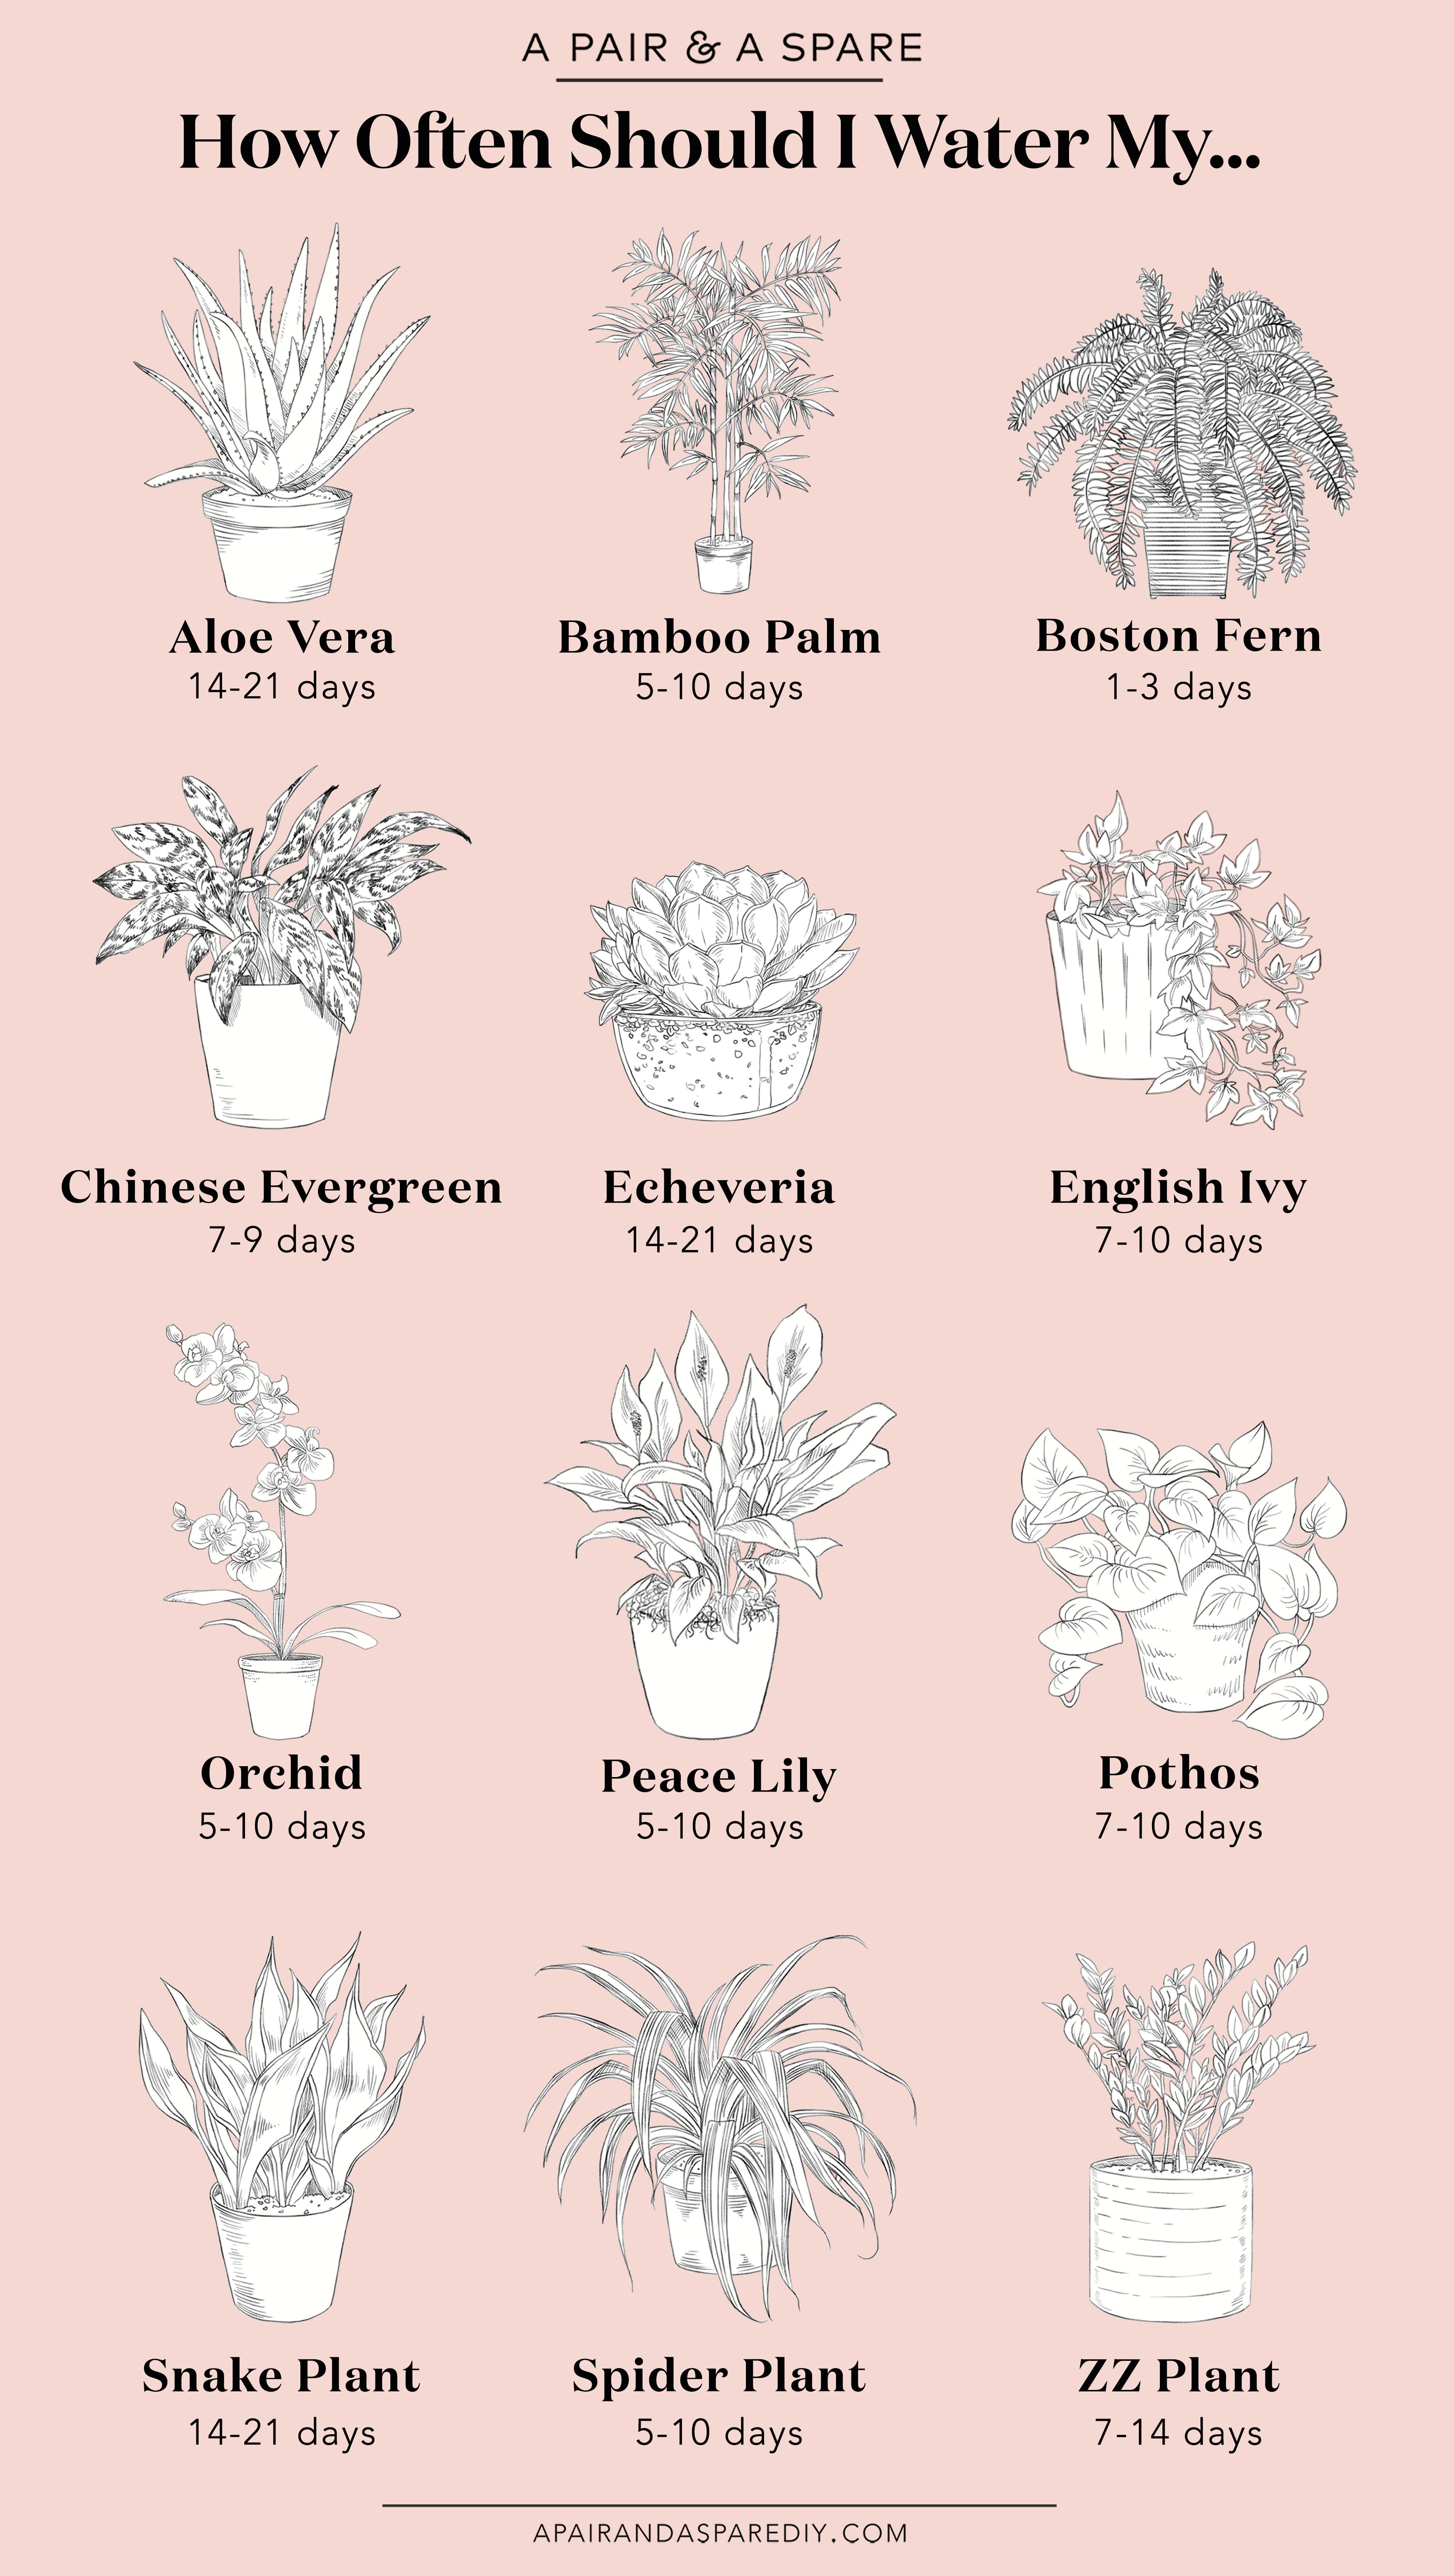 How Often Should I Water My Plants? (a pair & a spare) -   15 plants Room houseplant ideas